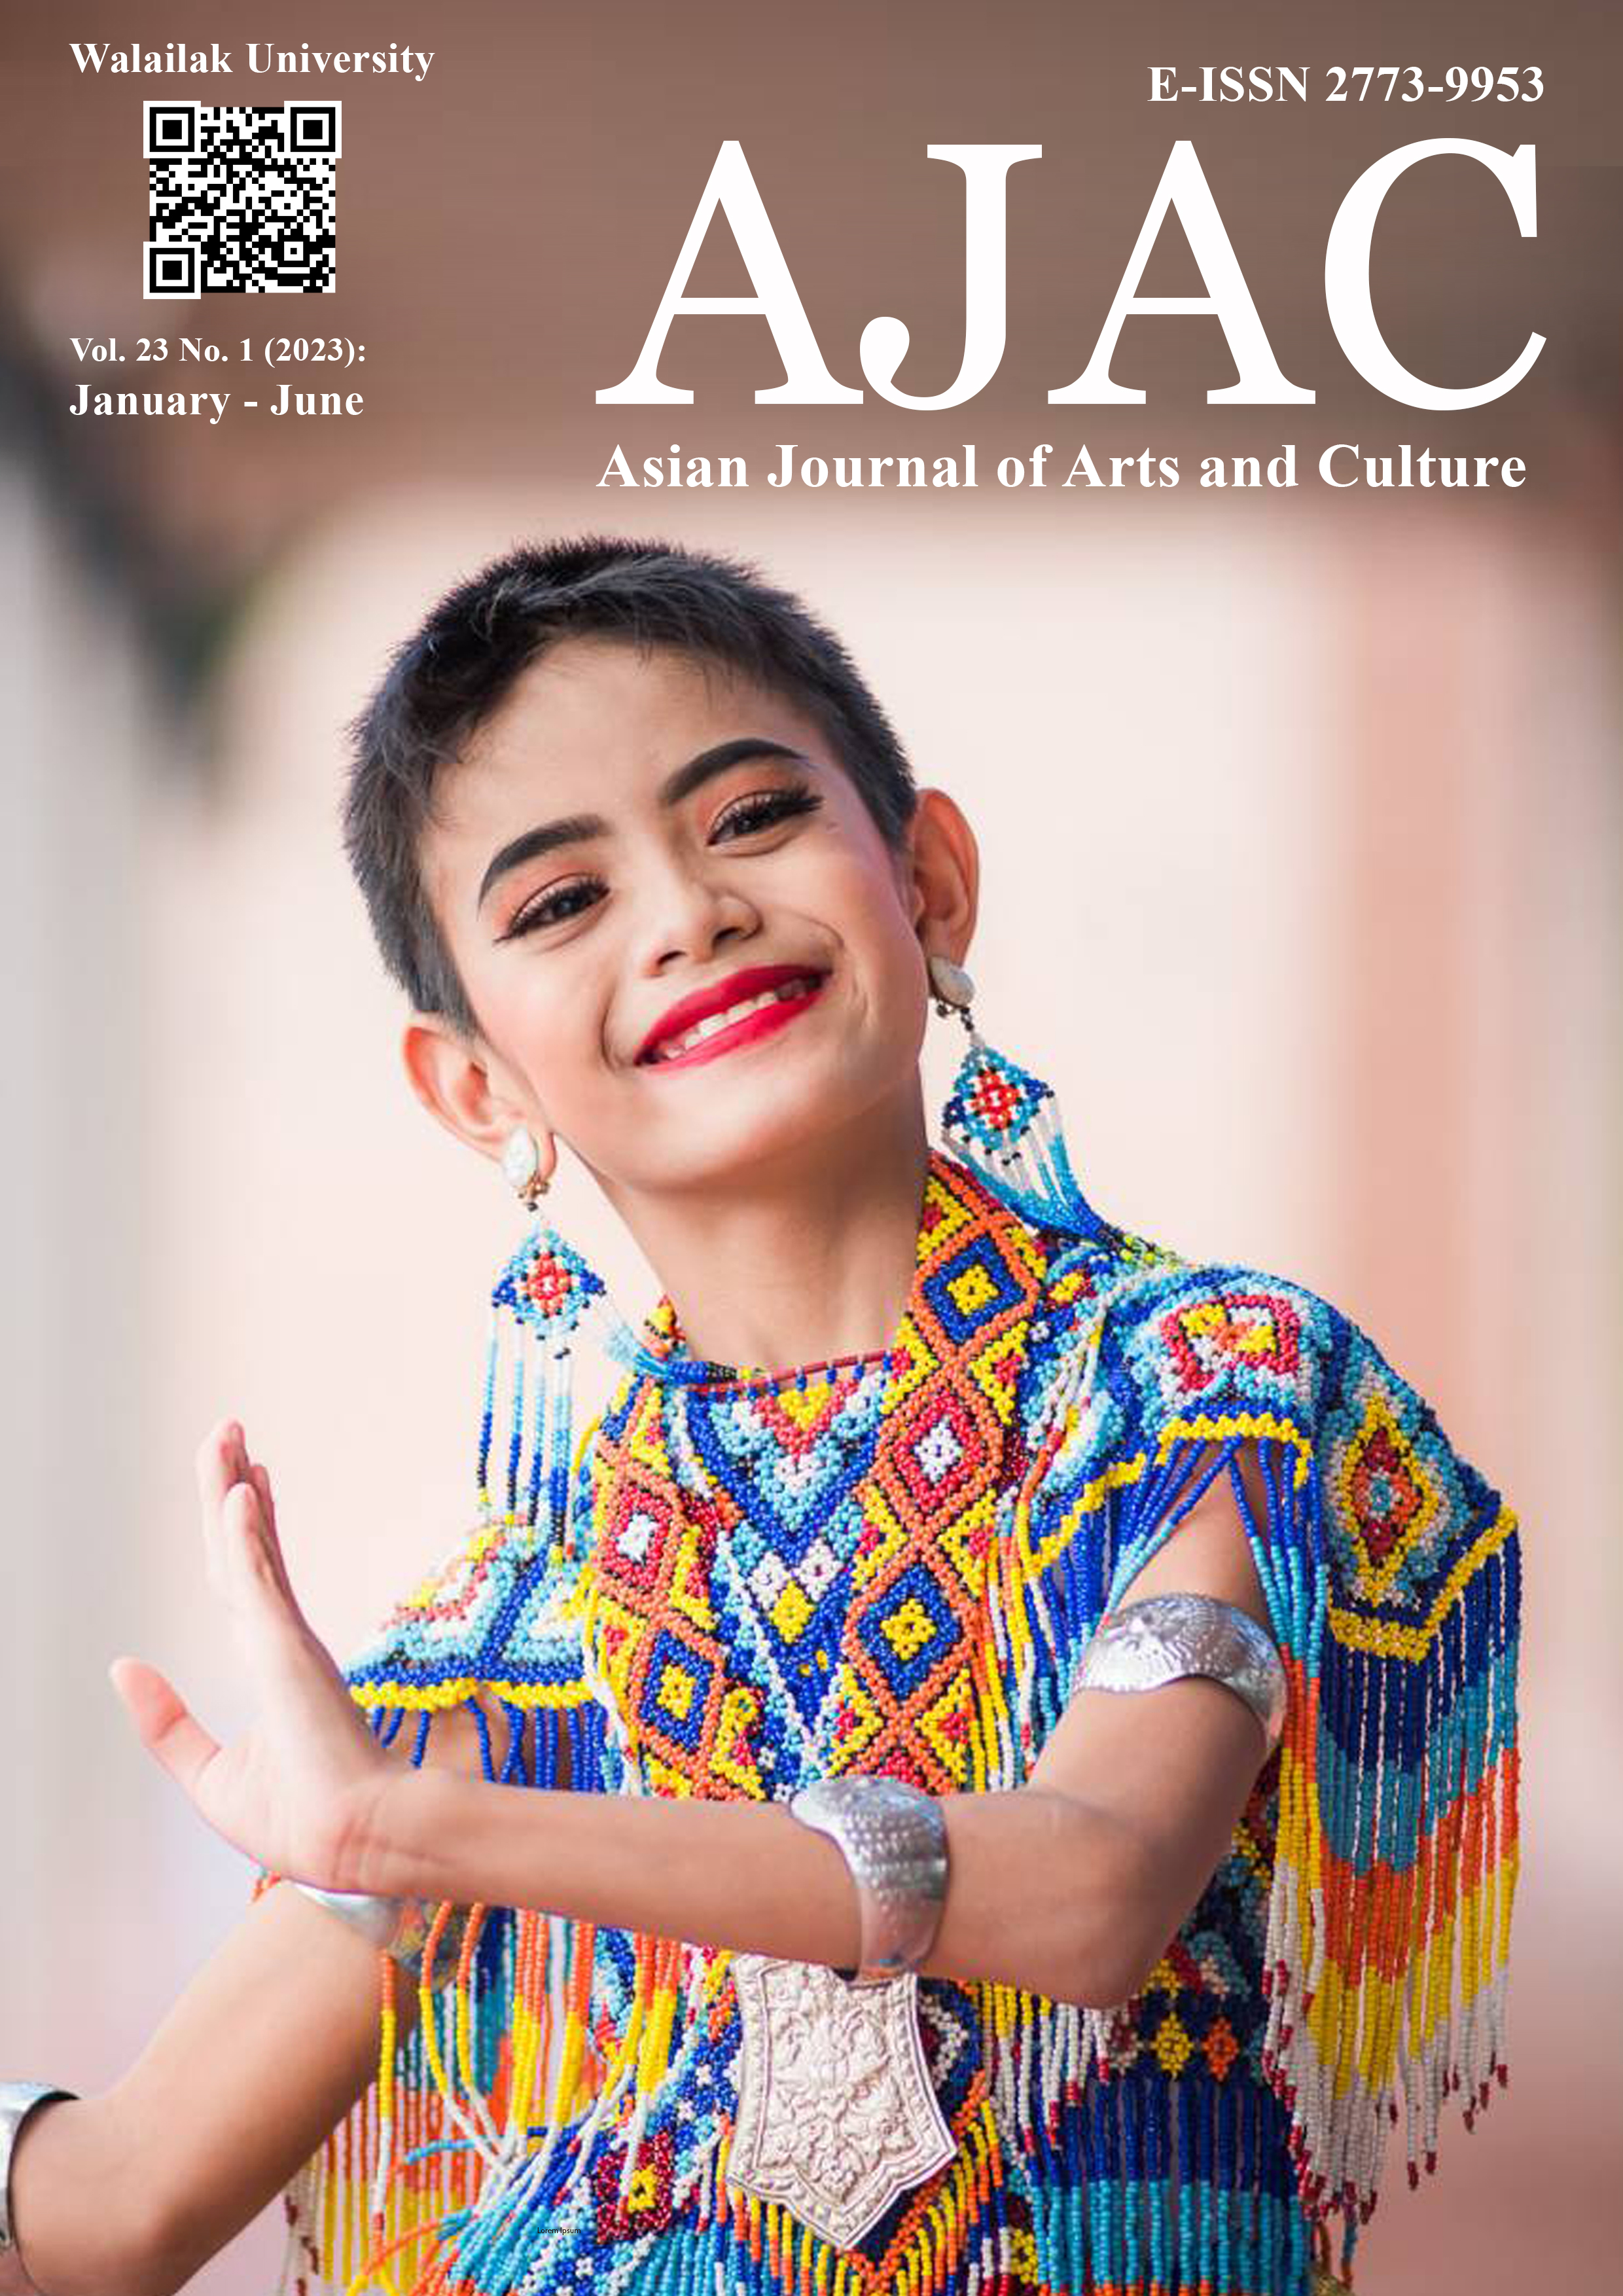 					View Vol. 23 No. 1 (2023): Asian Journal of Arts and Culture: January - June
				